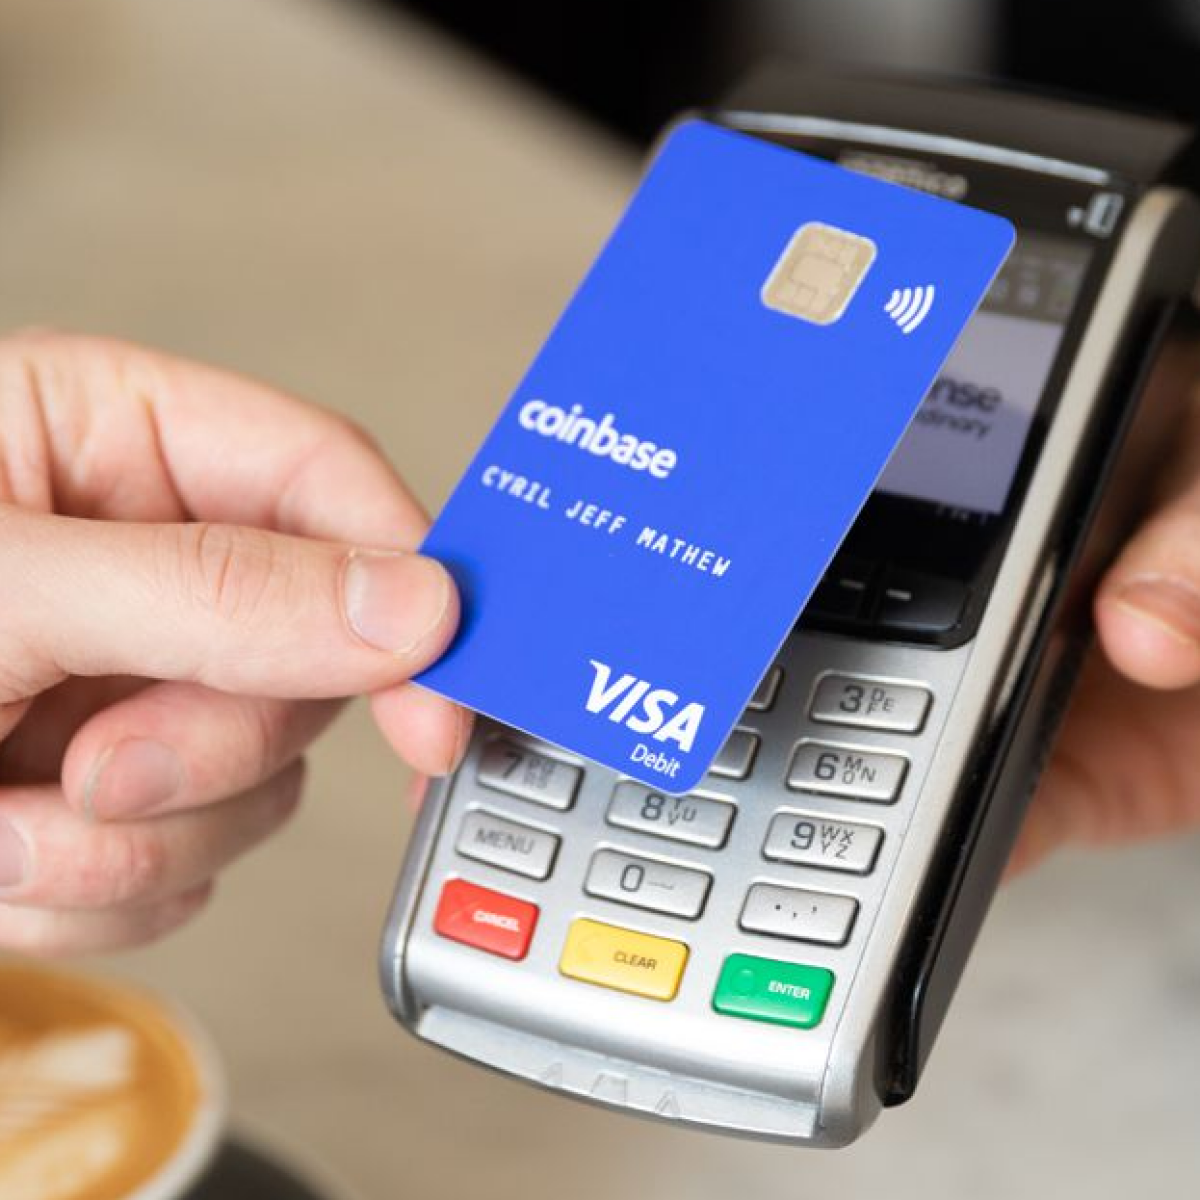 Coinbase Expands Cryptocurrency Visa Debit Cards Across Europe - CoinDesk